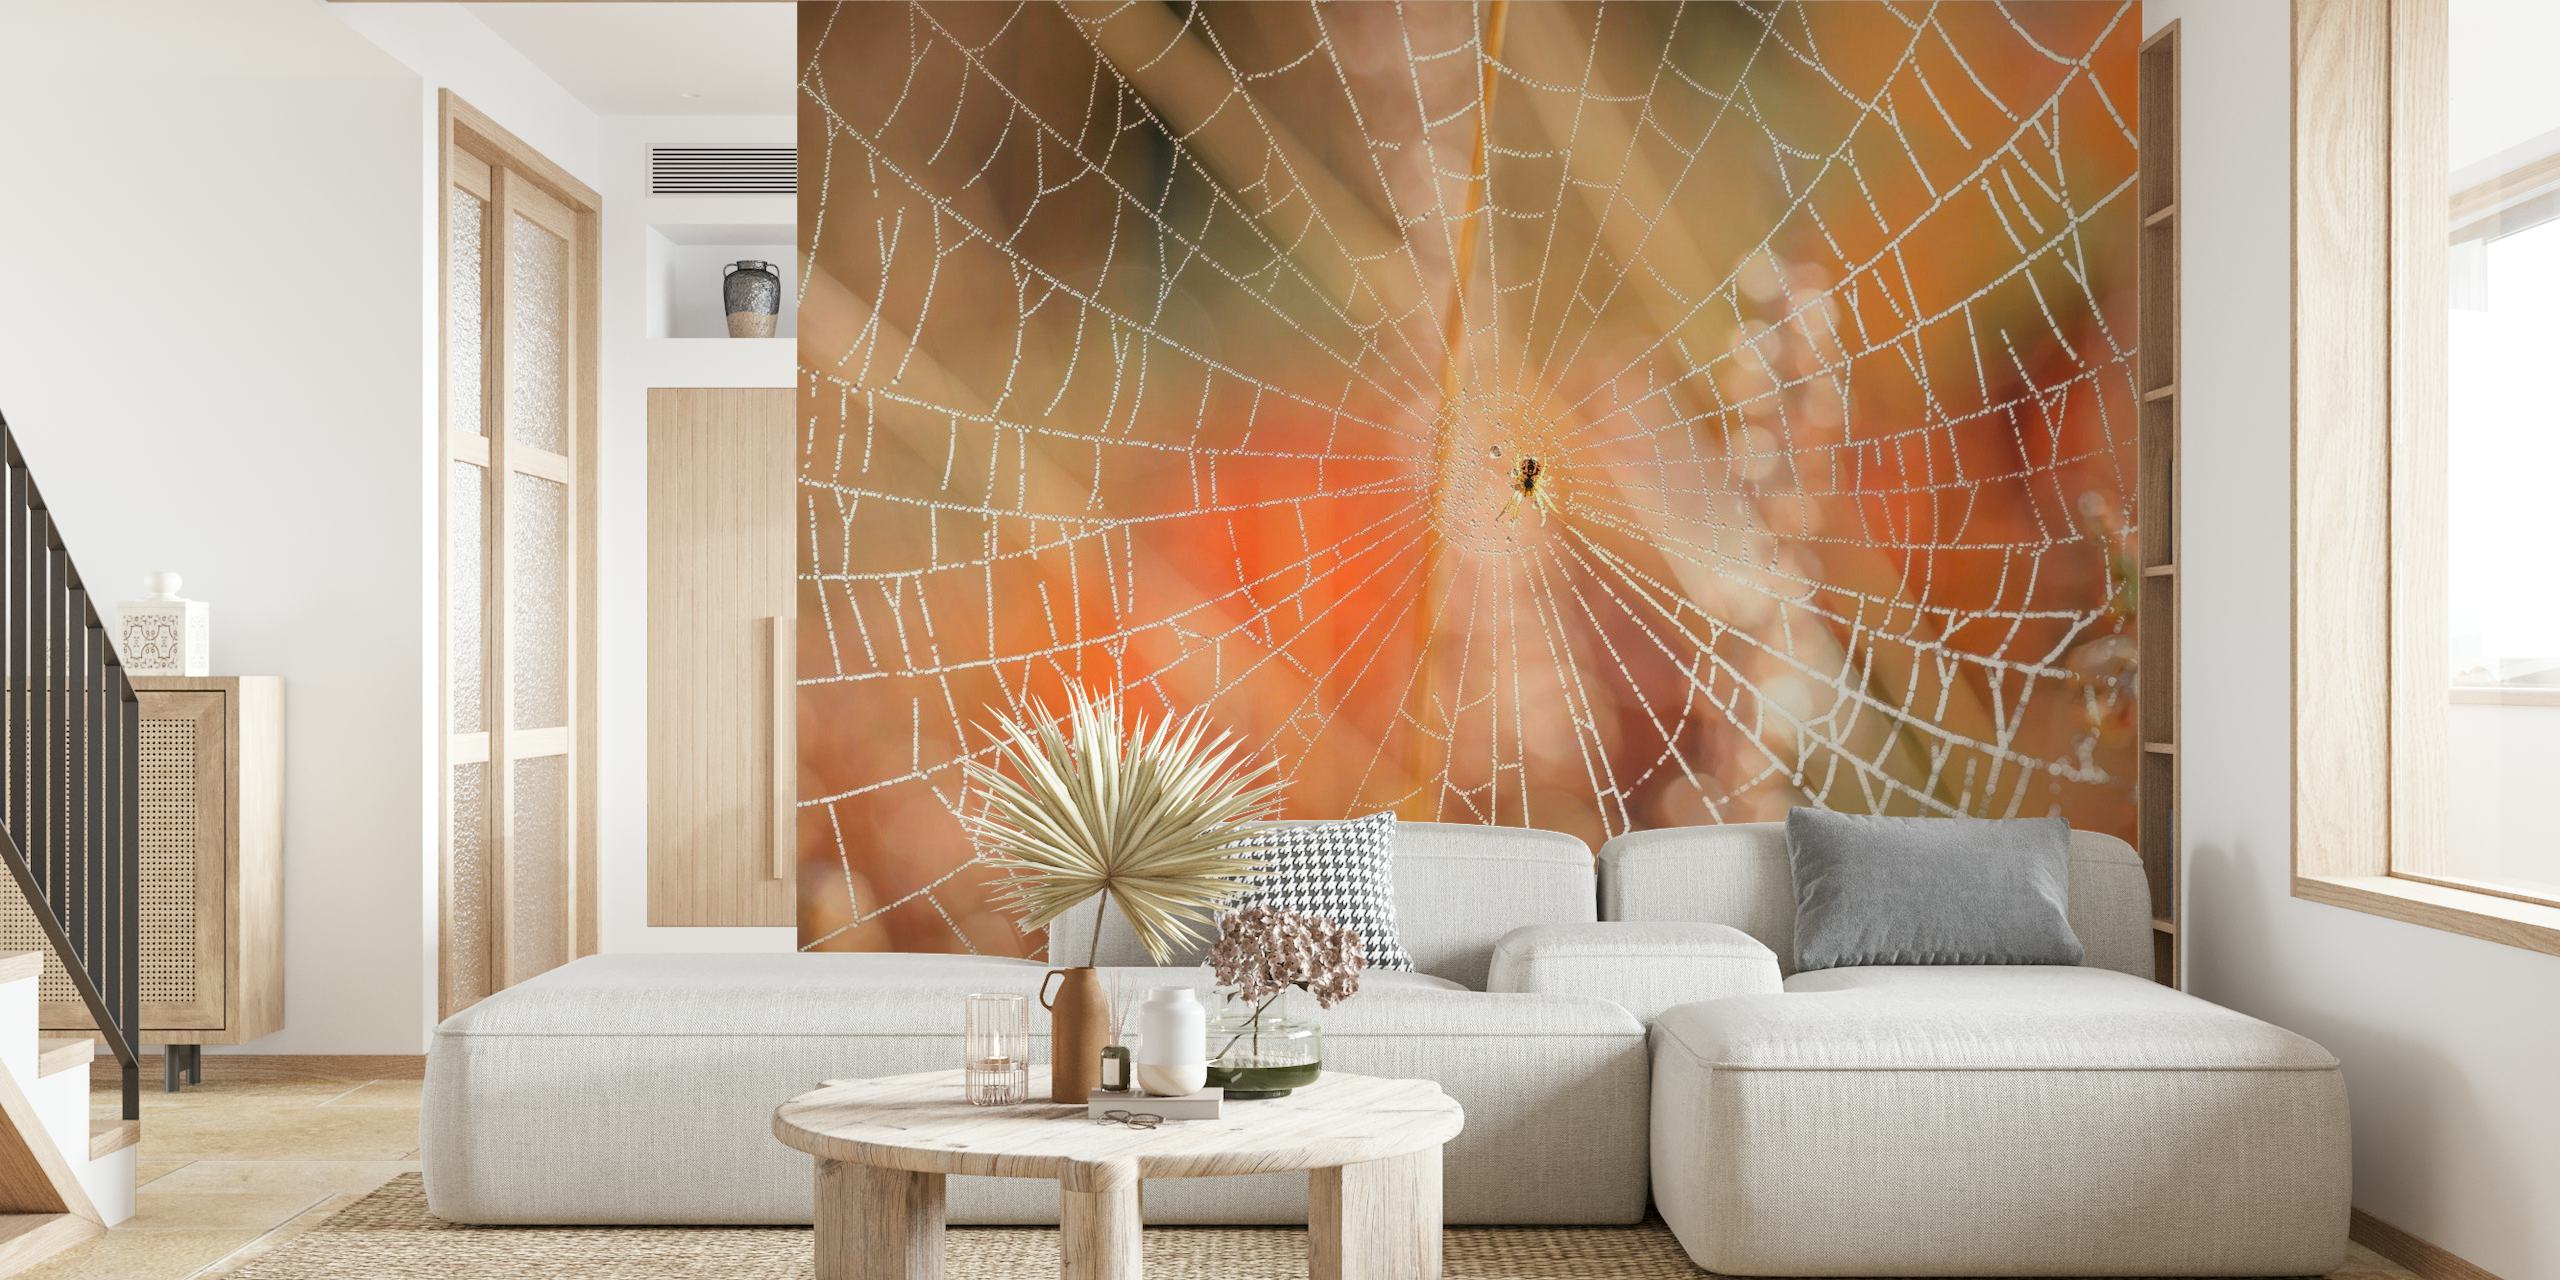 Intricate spider web wall mural with morning dew